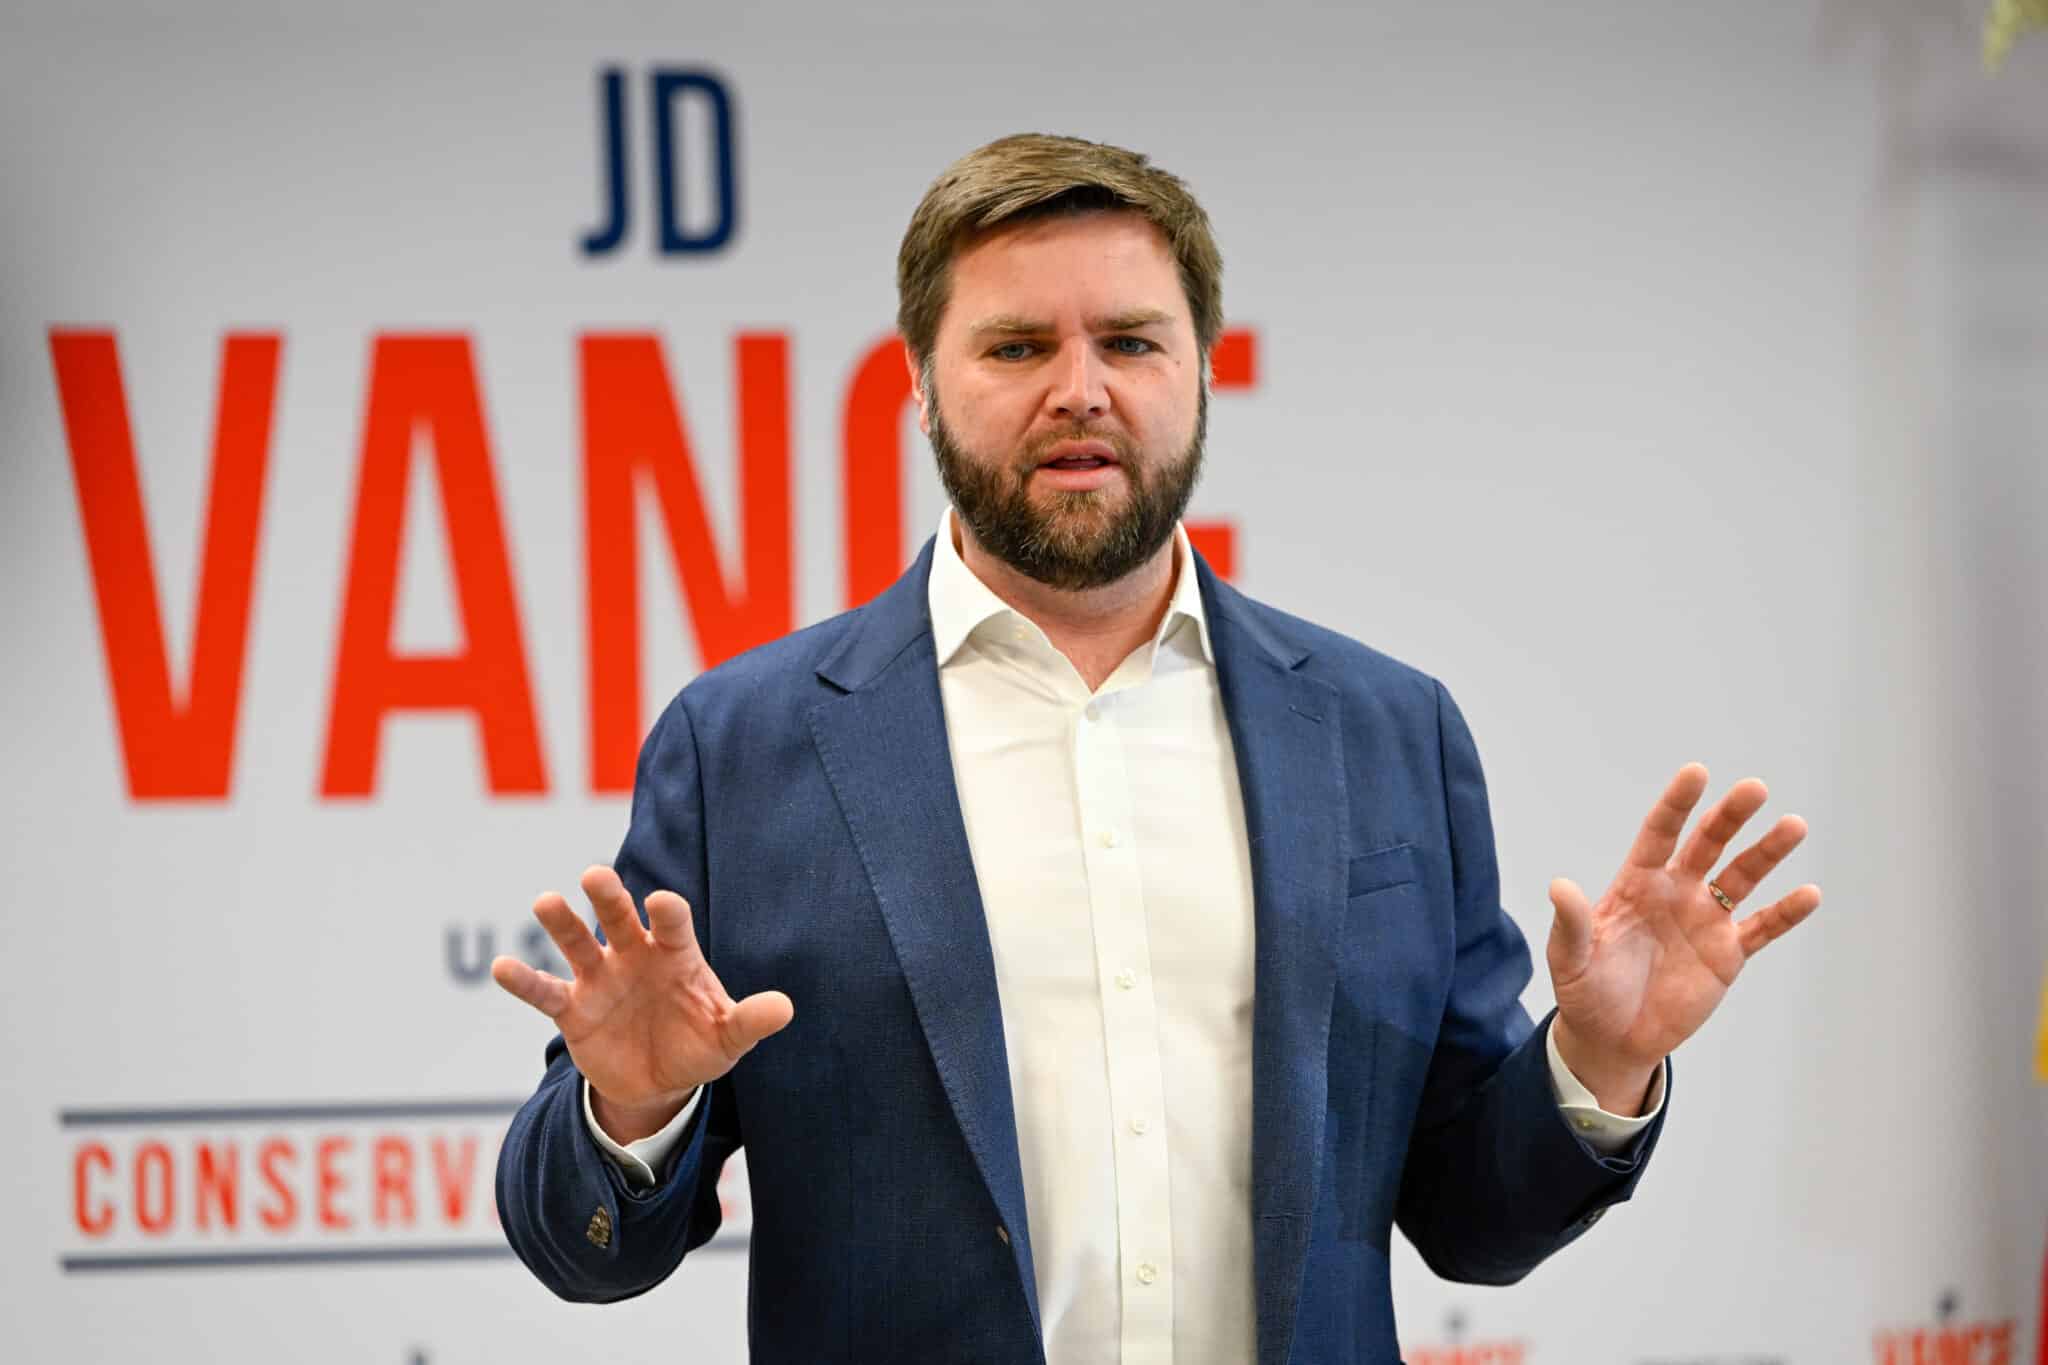 MIDDLETOWN, OH - OCTOBER 19: Republican U.S. Senate candidate JD Vance speaks with supporters in his hometown at the Butler County GOP headquarters on October 19, 2022 in Middletown, Ohio. Vance, who is endorsed by former President Donald Trump, is running against Democratic candidate Rep. Tim Ryan (D-OH) in the November election. (Photo by Gaelen Morse/Getty Images)